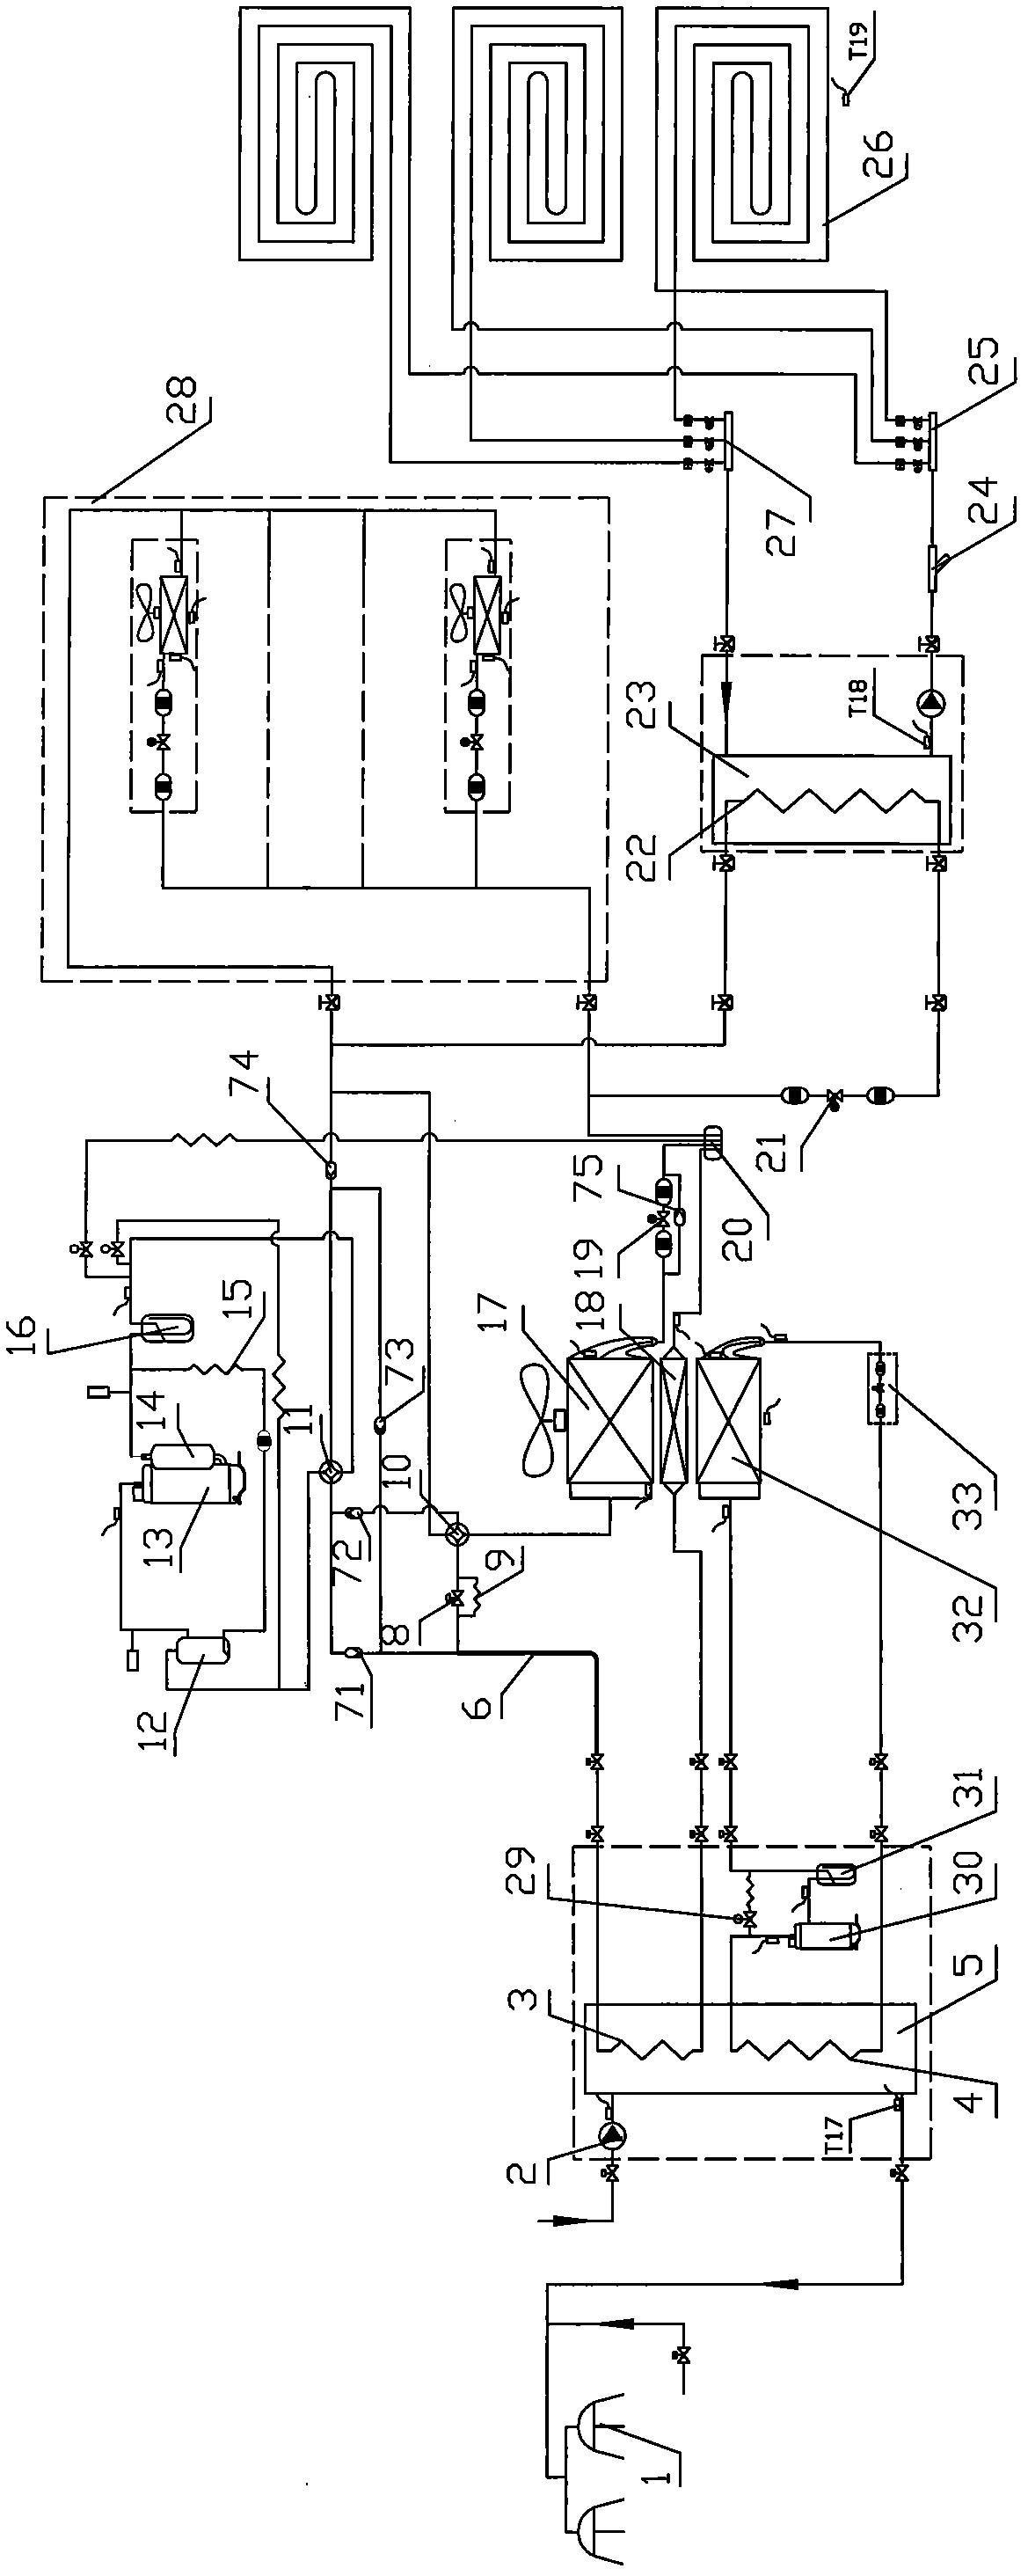 Direct current variable frequency multifunctional air conditioning system and control method thereof